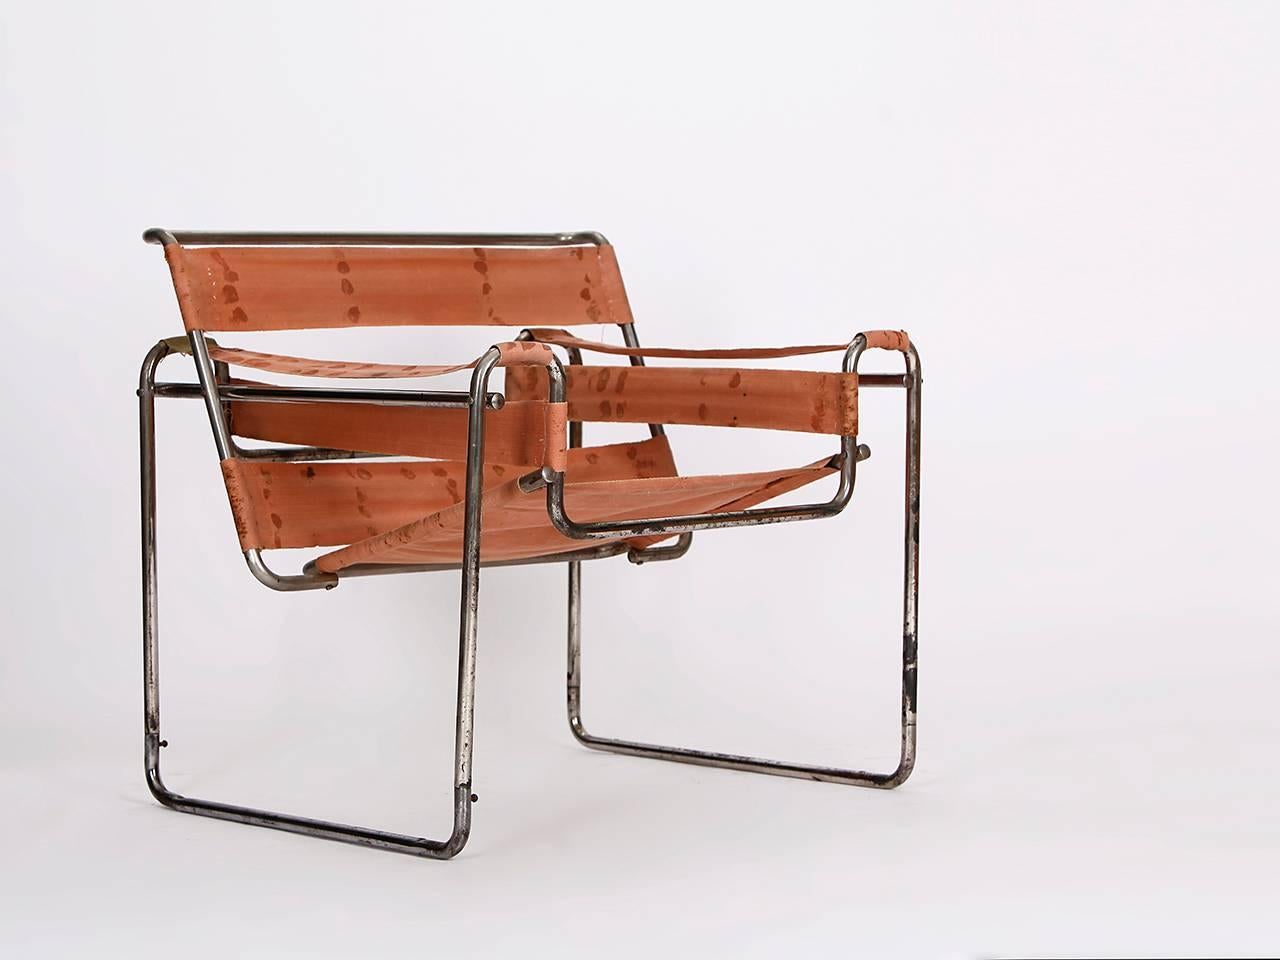 This chair, also known as the model B3, was designed by Marcel Breuer in 1925-1926
during his time at the Bauhaus in Dessau, Germany. The fabric is the old Eisengarn,
developed by Margaretha Reichardt at the Bauhaus. Unrestored original